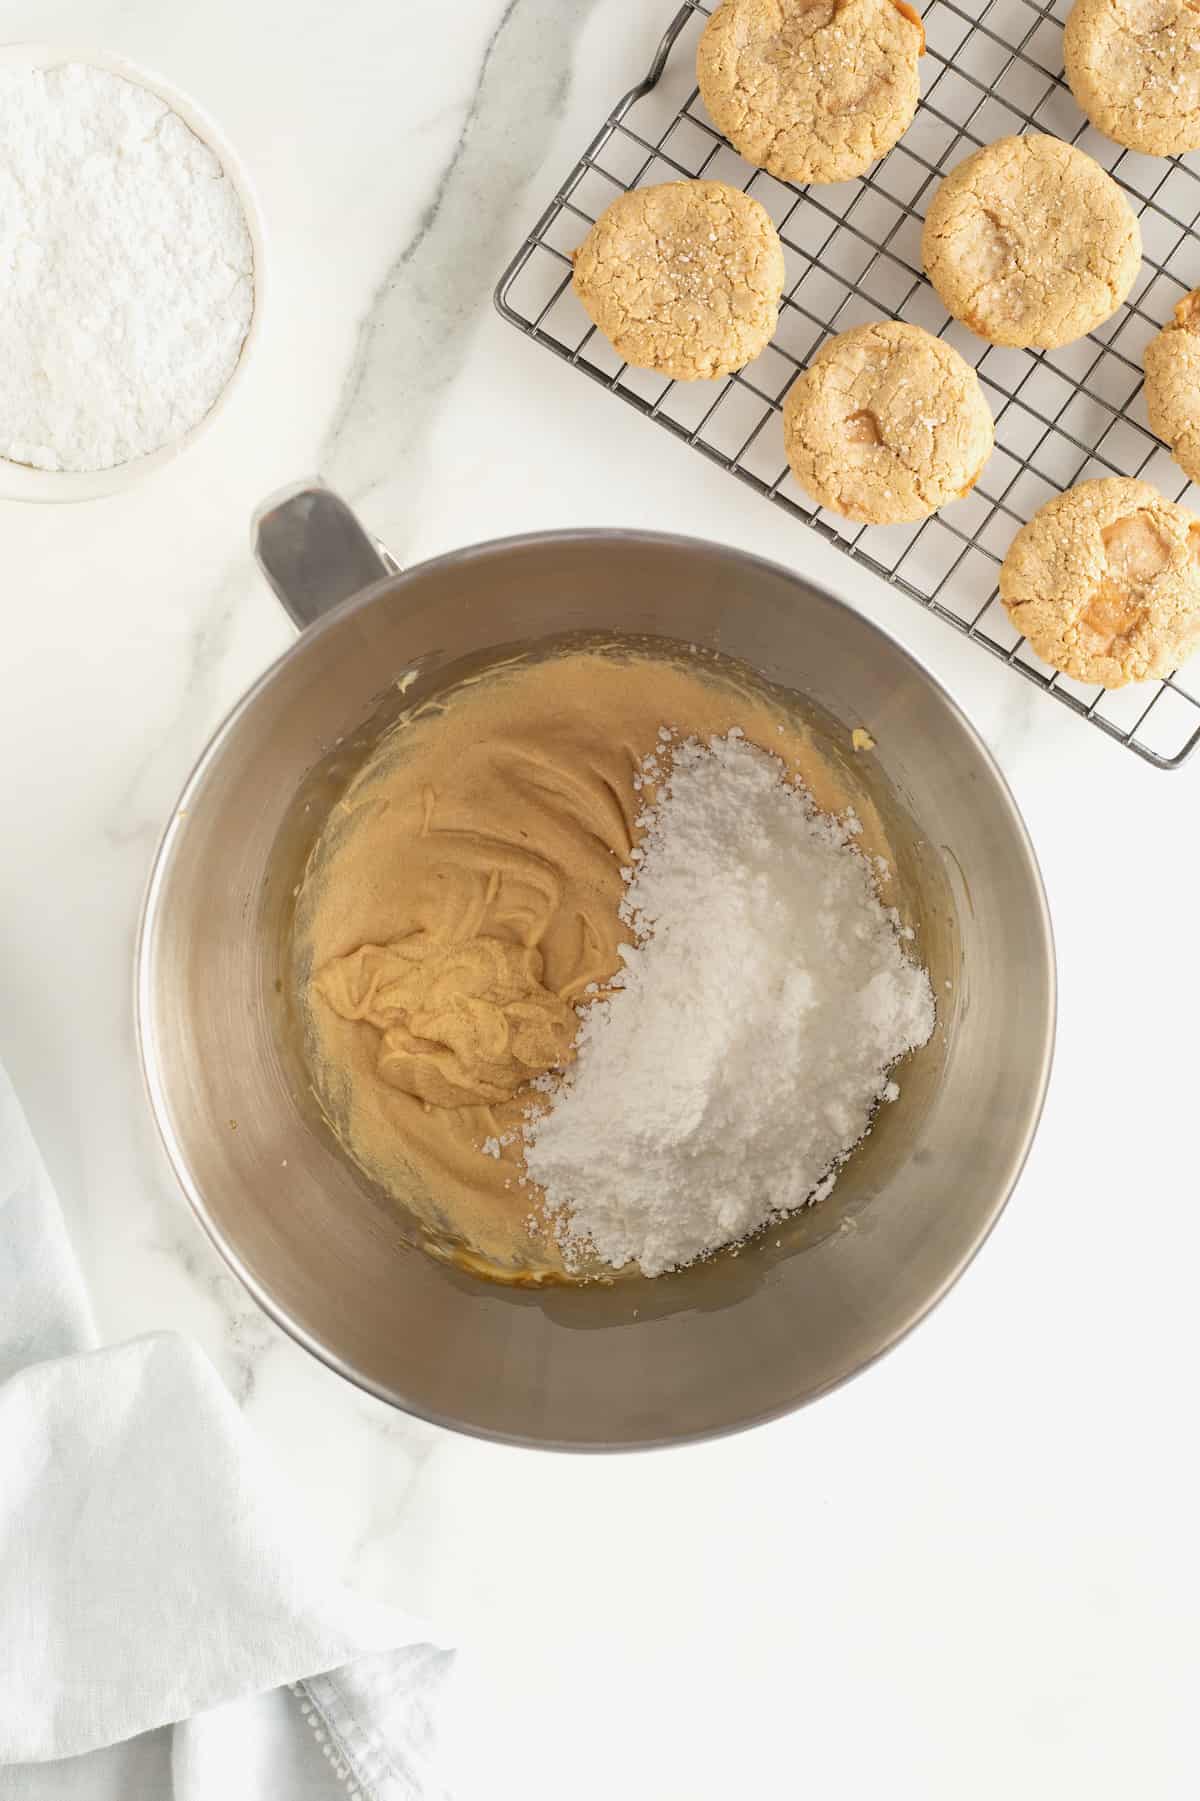 Powdered sugar in a mixing bowl with cream filling.